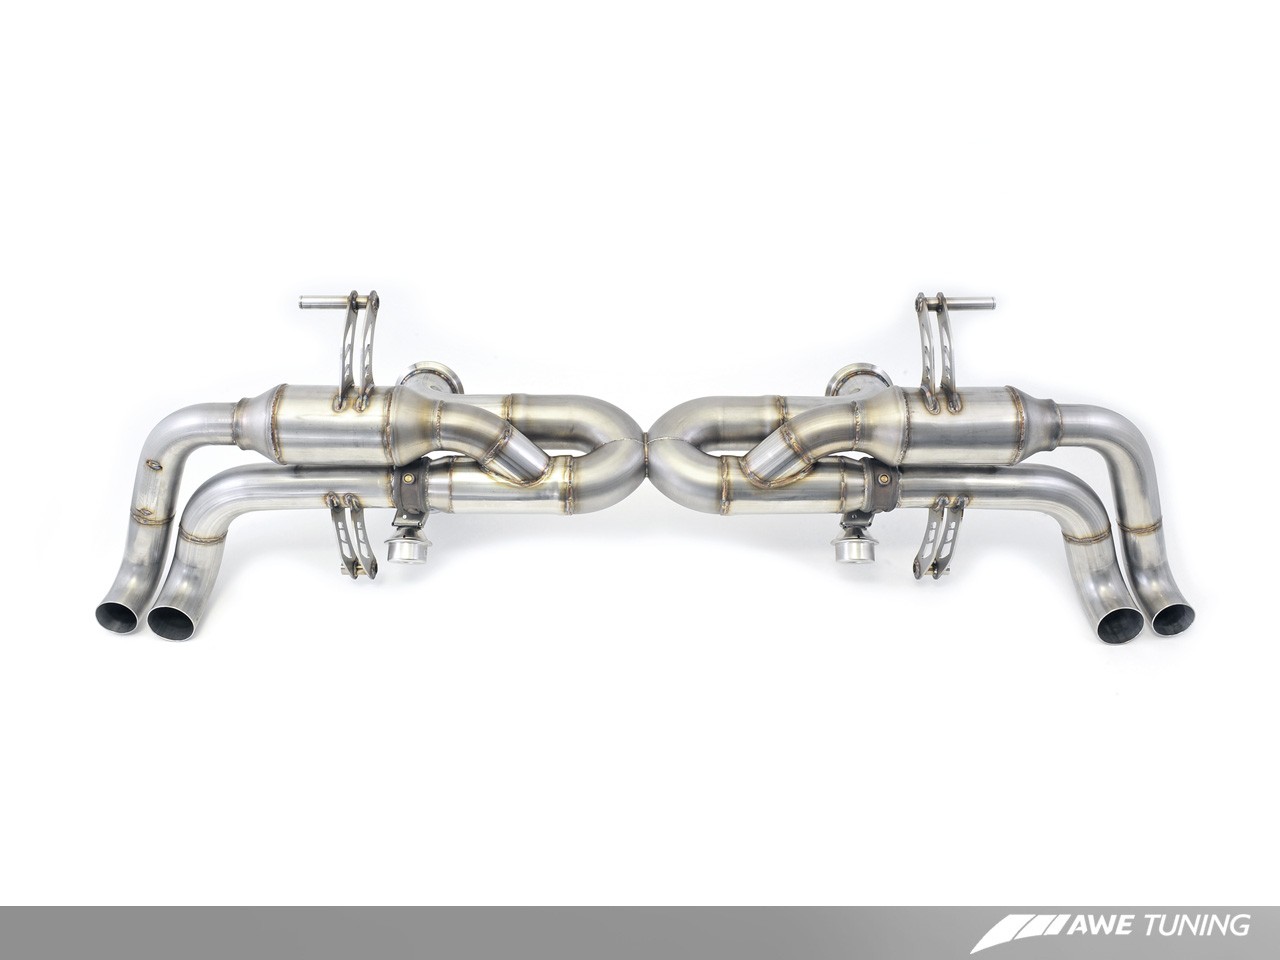 AWE Tuning SwitchPath Exhaust System Audi R8 V10 Spyder 5.2L 2011-2012 - 3025-31026